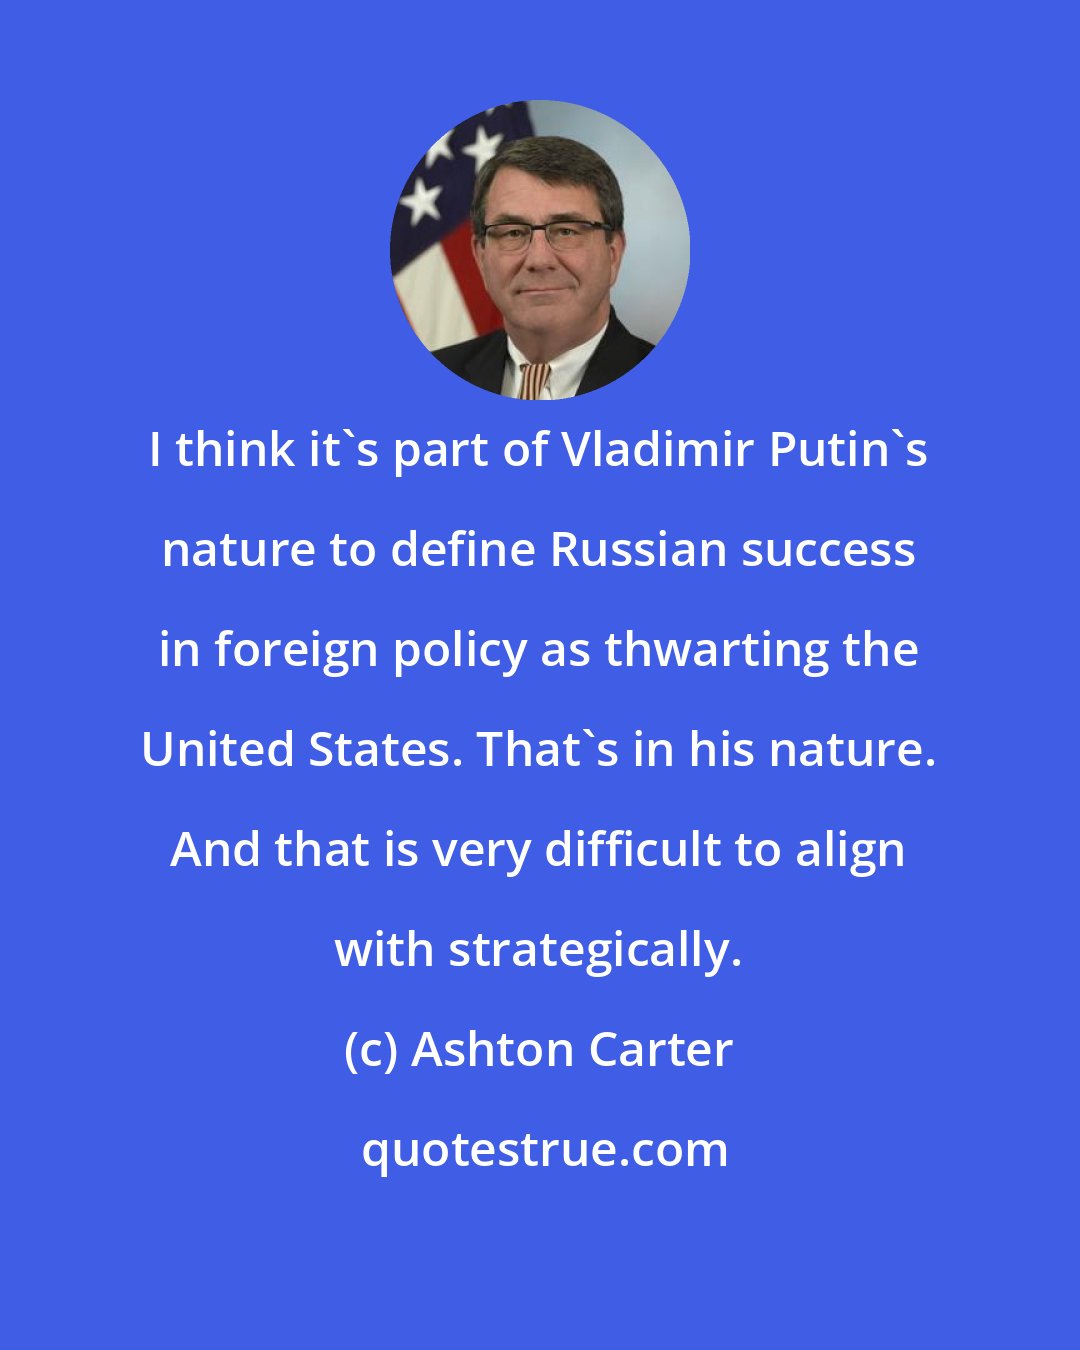 Ashton Carter: I think it's part of Vladimir Putin's nature to define Russian success in foreign policy as thwarting the United States. That's in his nature. And that is very difficult to align with strategically.